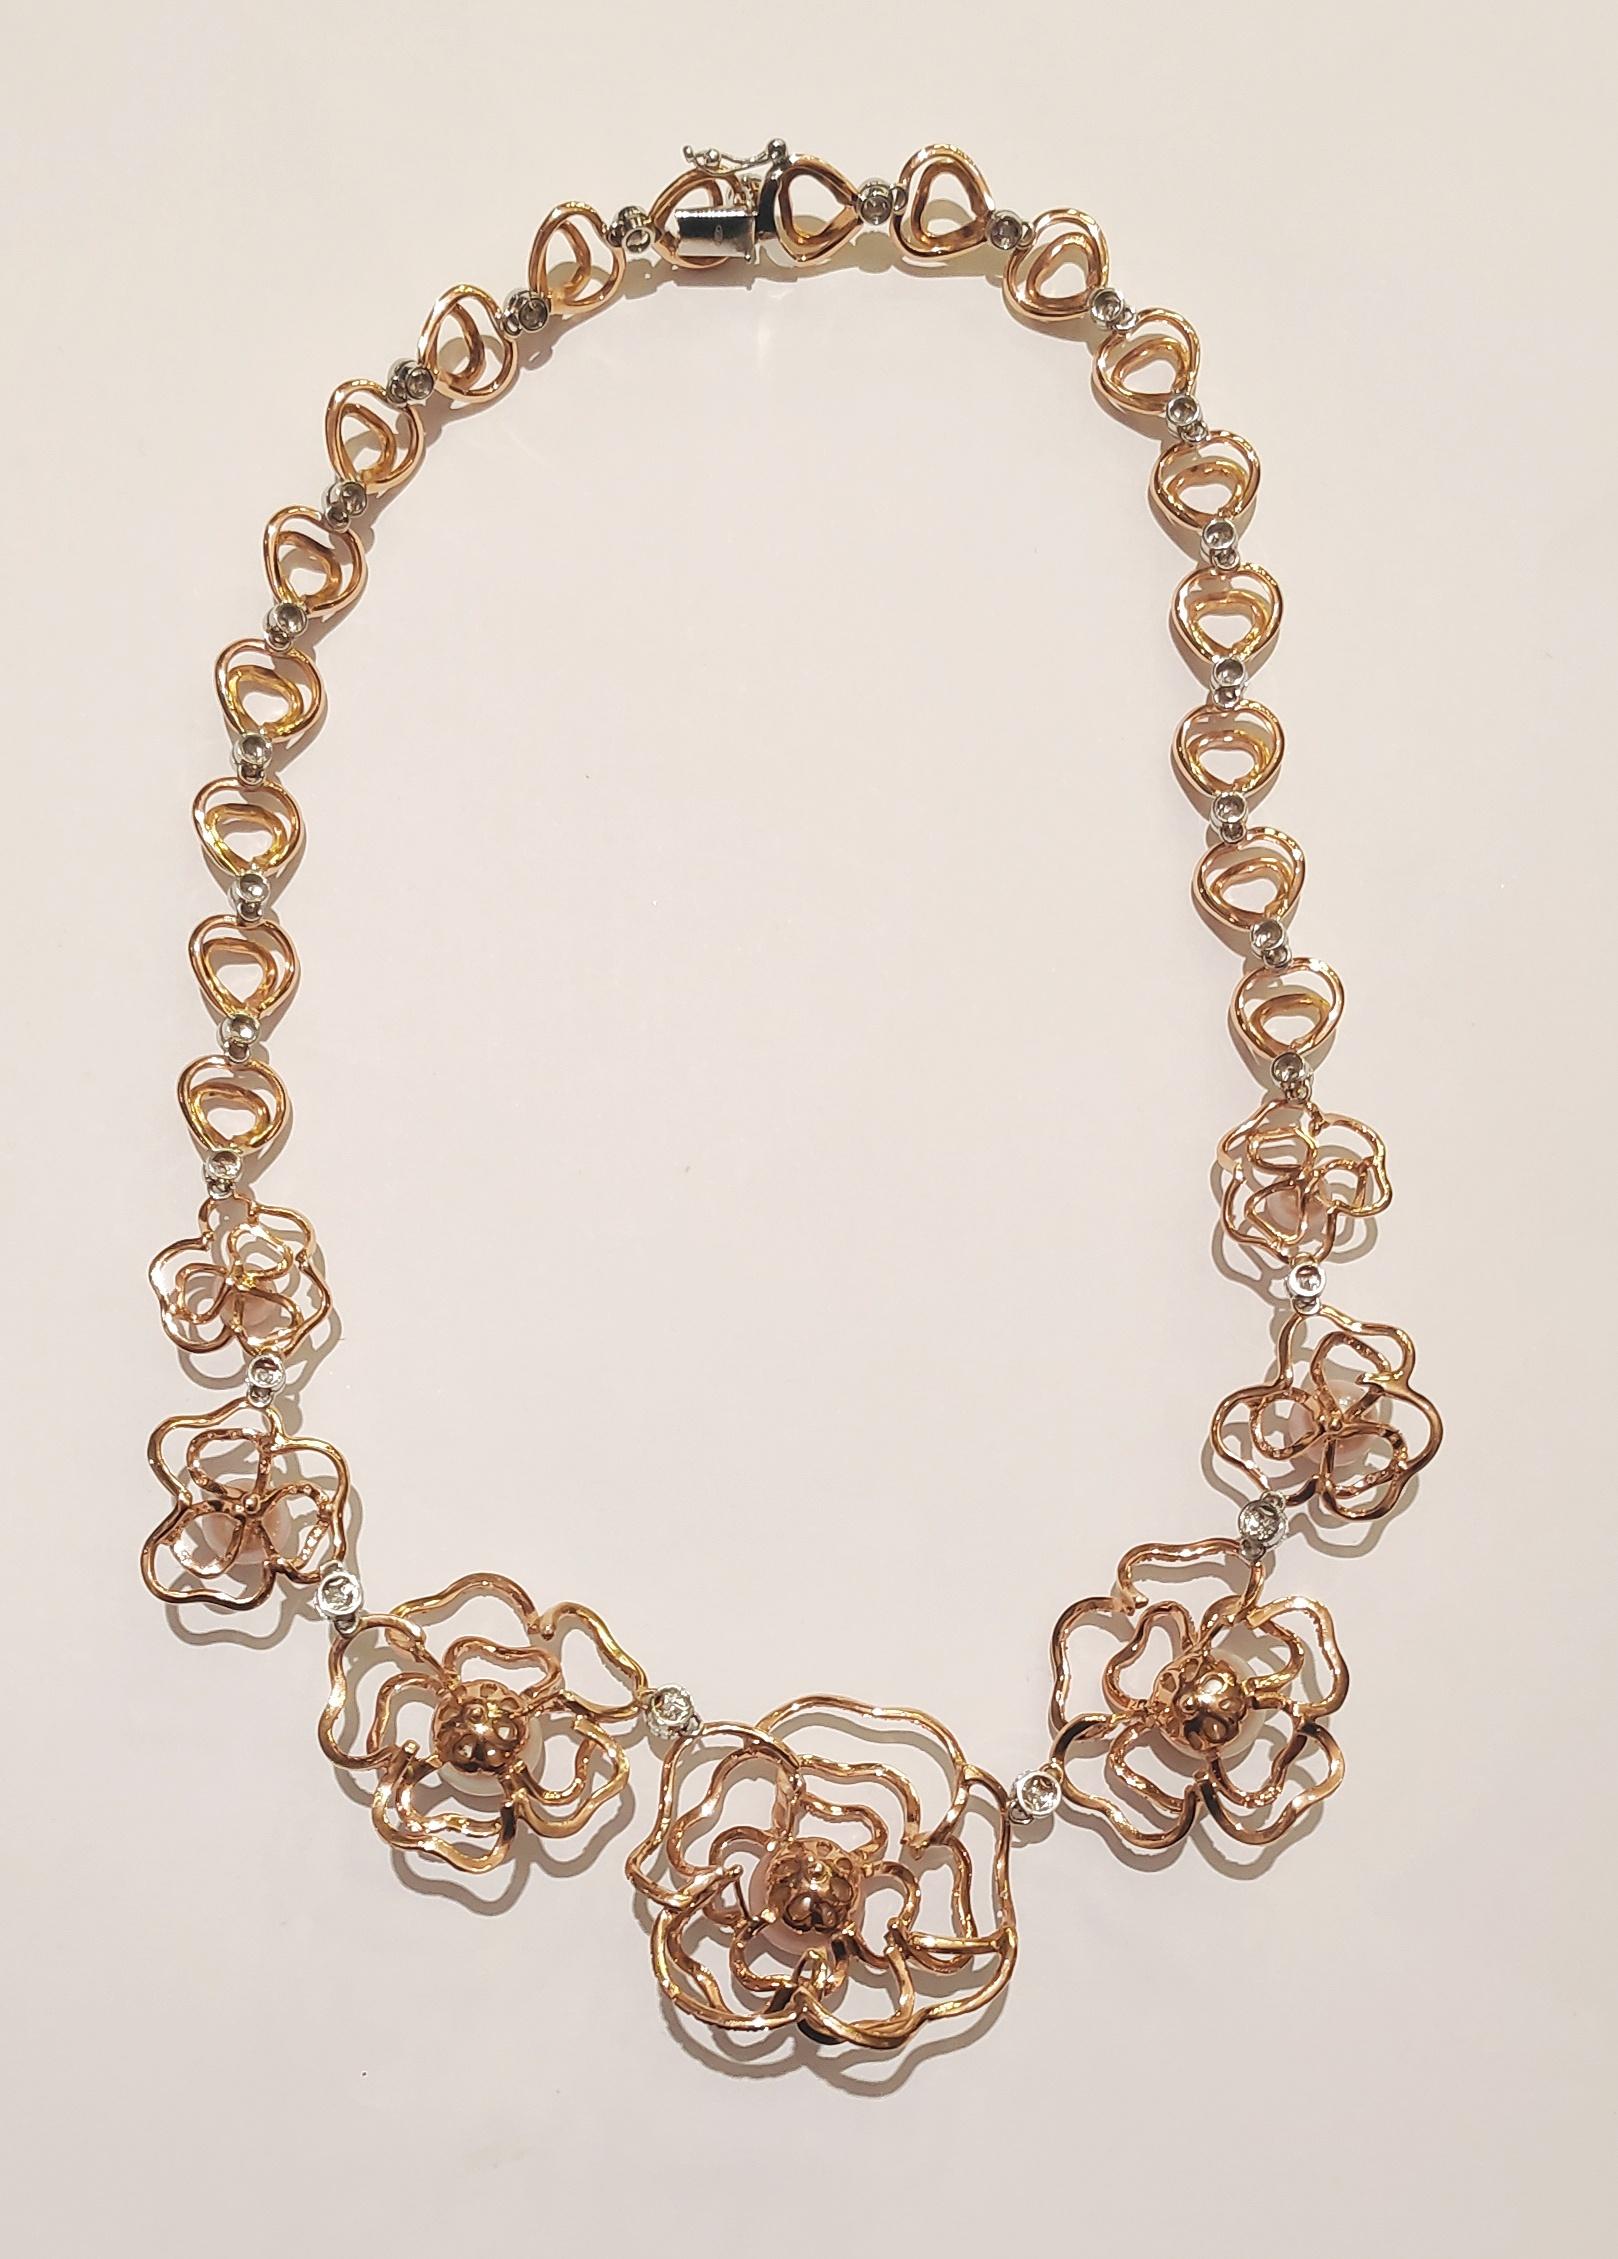 Round Cut Diamonds and Pearls Link Necklace Pink Gold 18 Karat For Sale